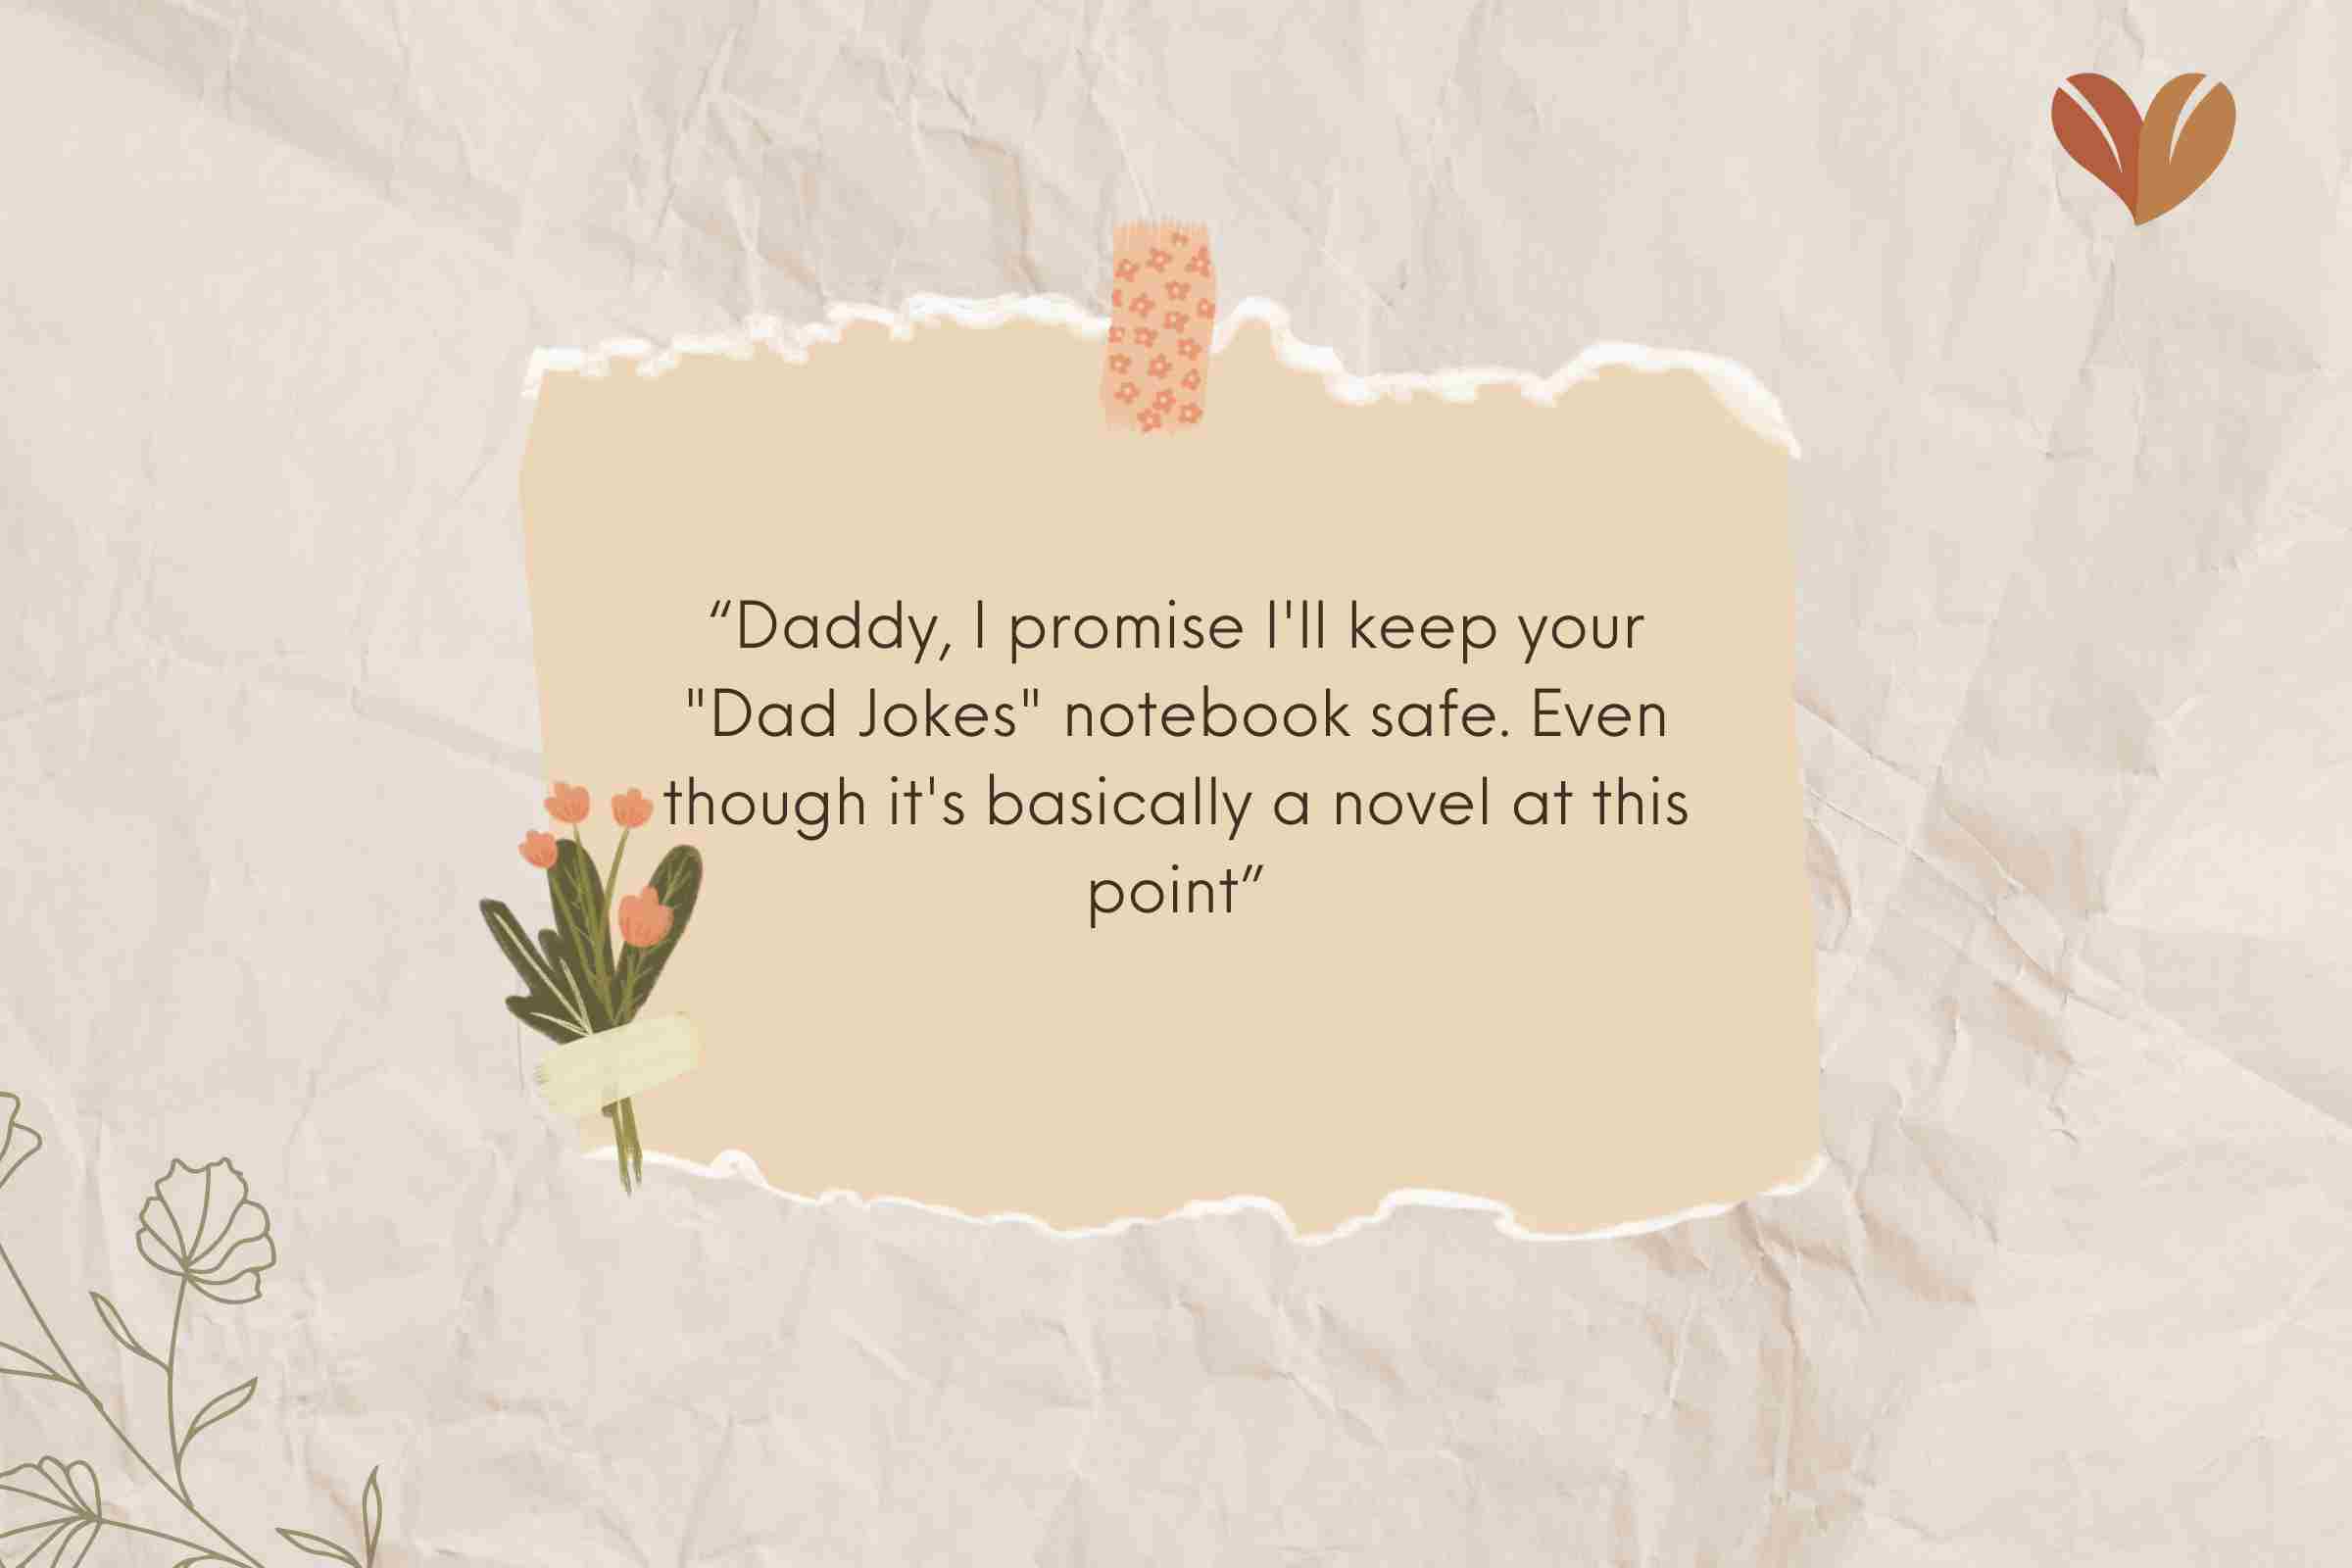 “Daddy, I promise I'll keep your "Dad Jokes" notebook safe. 